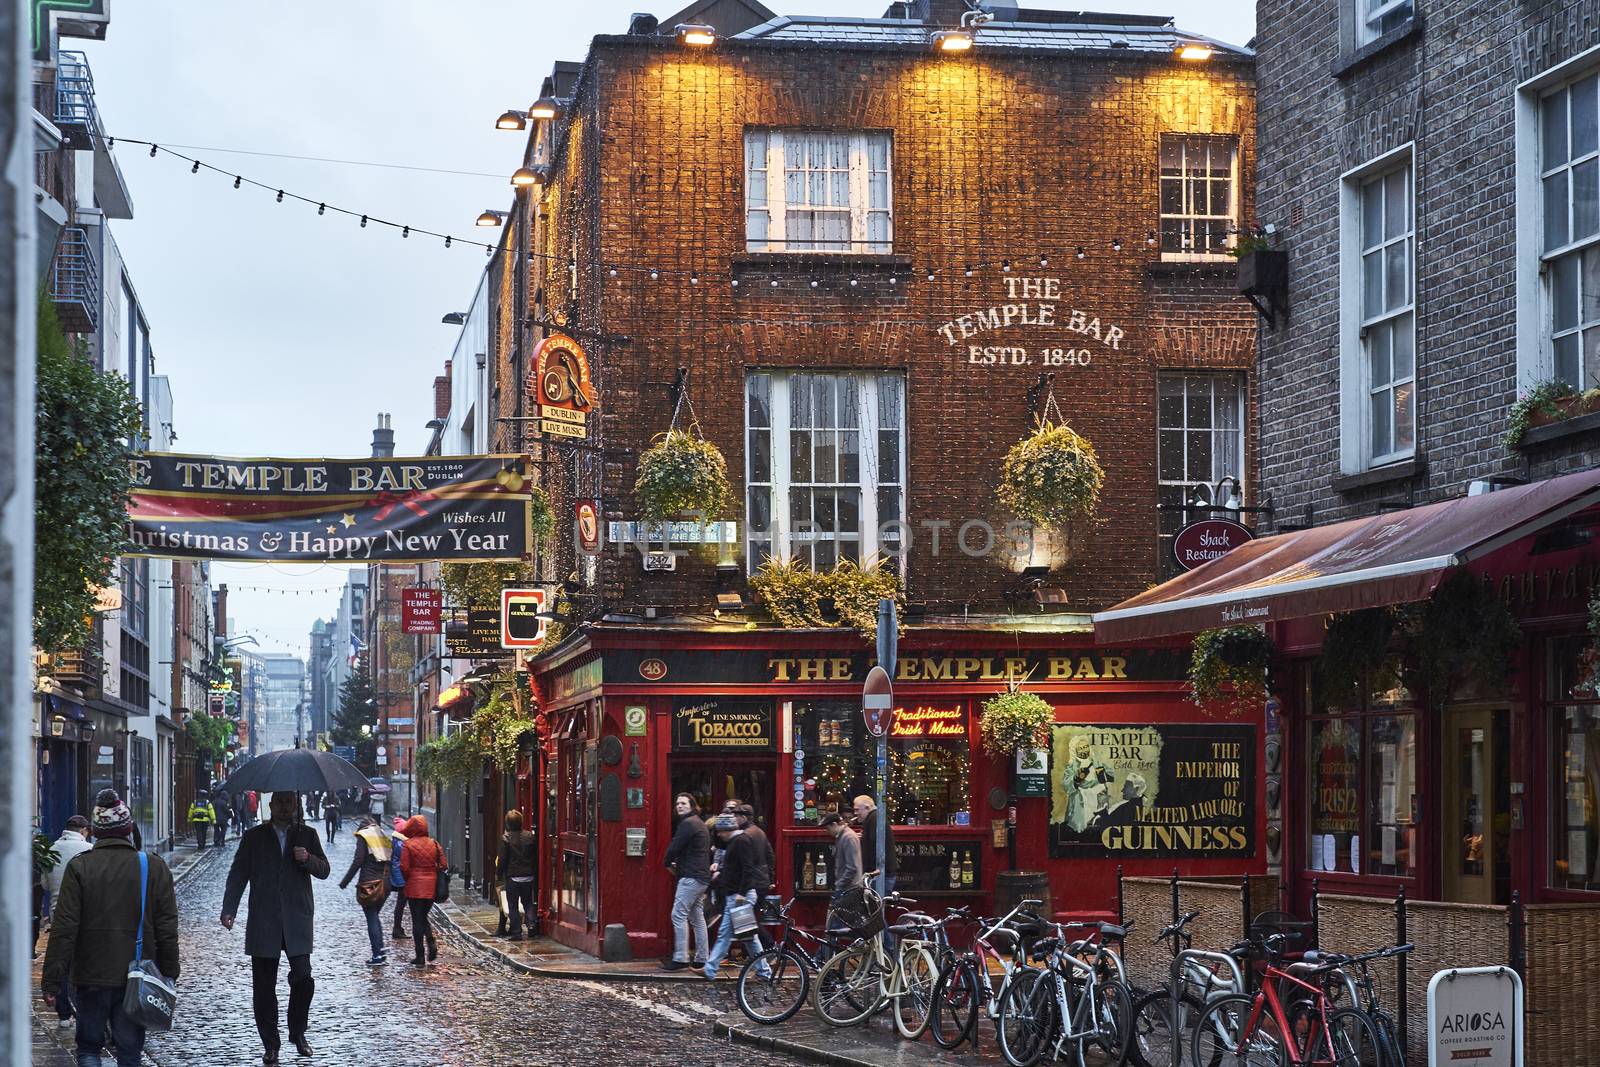 DUBLIN, IRELAND - JANUARY 05: Street in Temple Bar during rainy evening. The area is the heart of tourism in the city. January 05, 2016 in Dublin